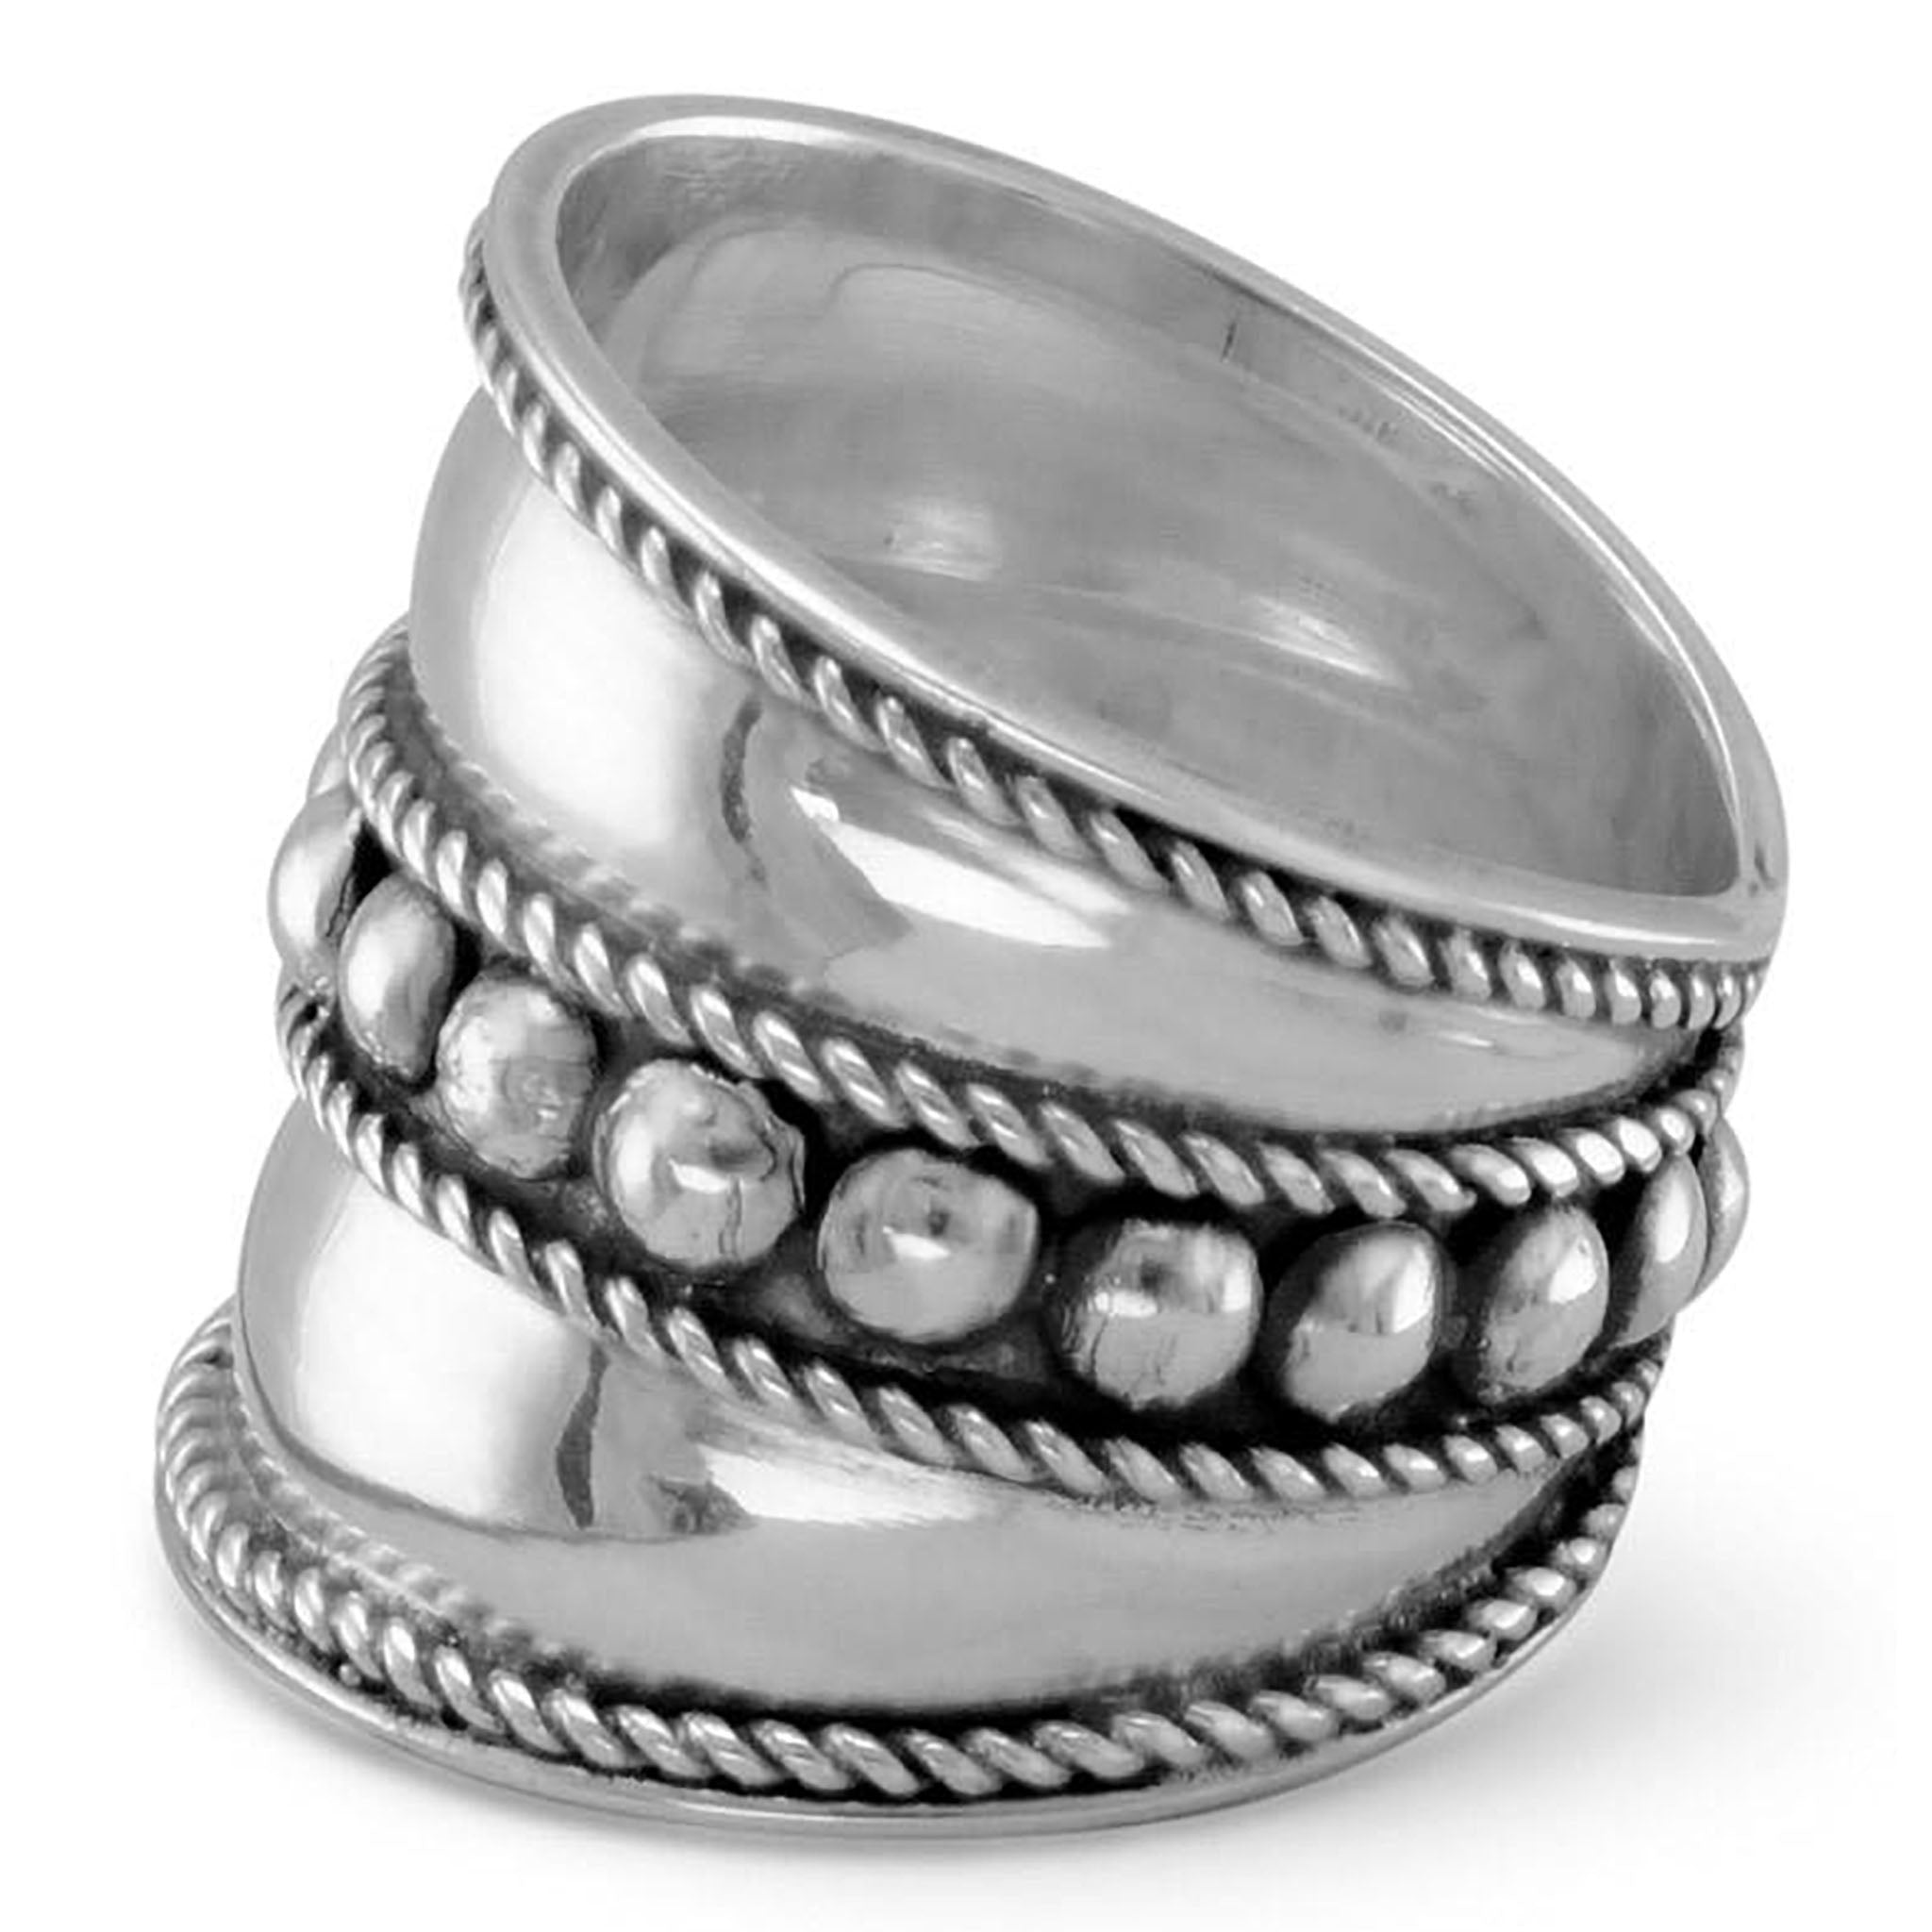 Bali Design Wide Band Ring Side View